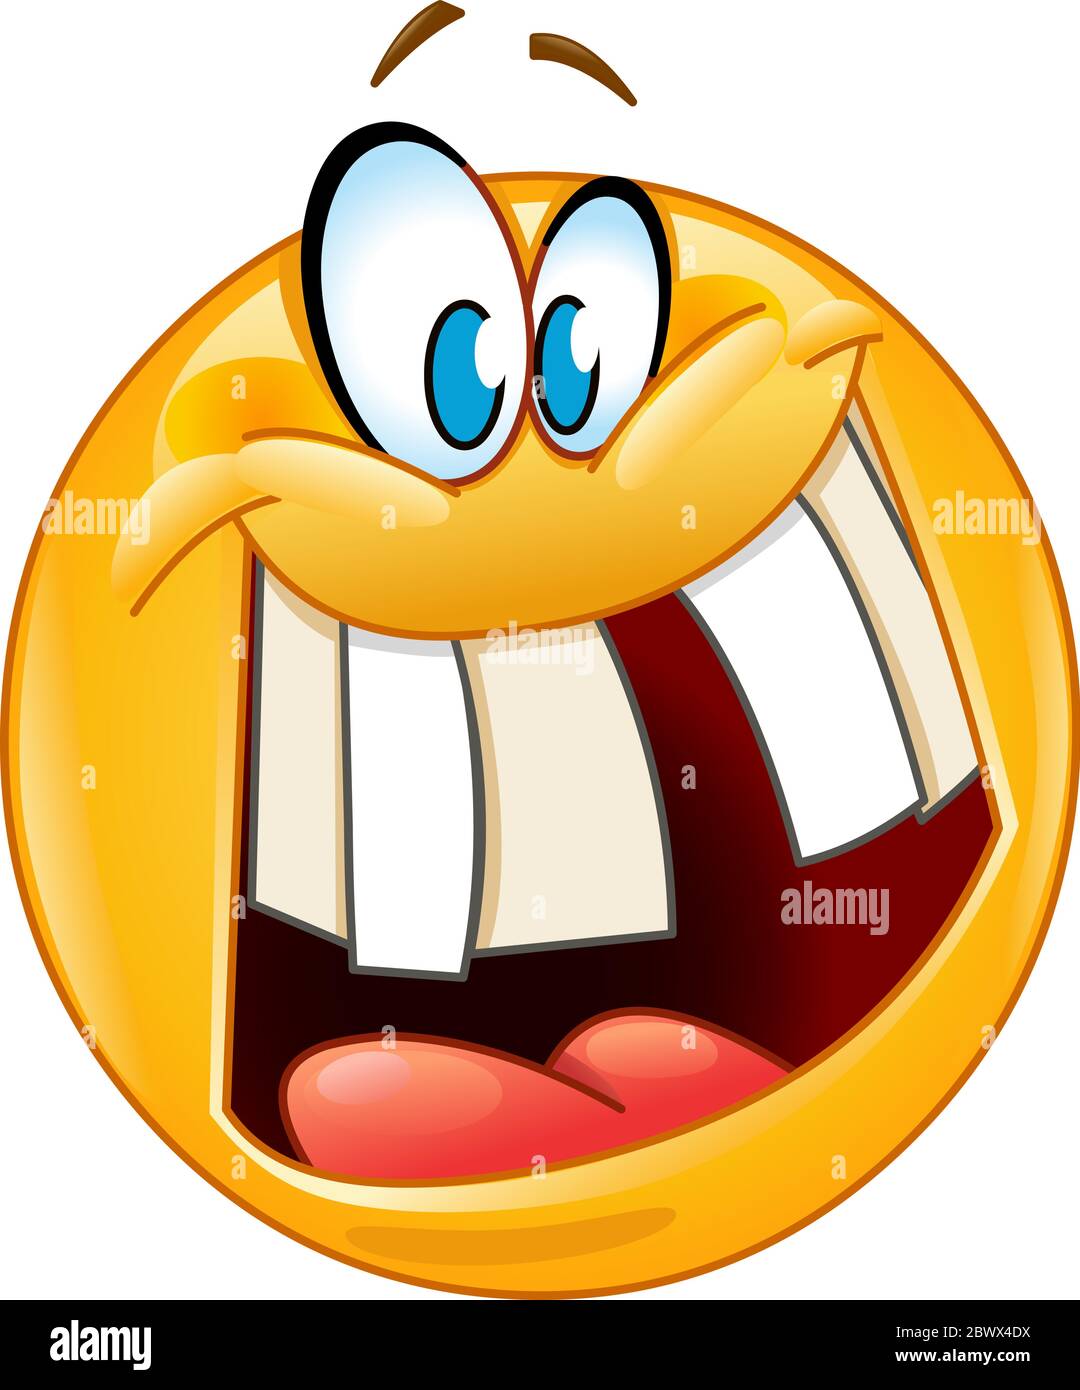 Emoticon with crazy smile revealing a gap tooth Stock Vector